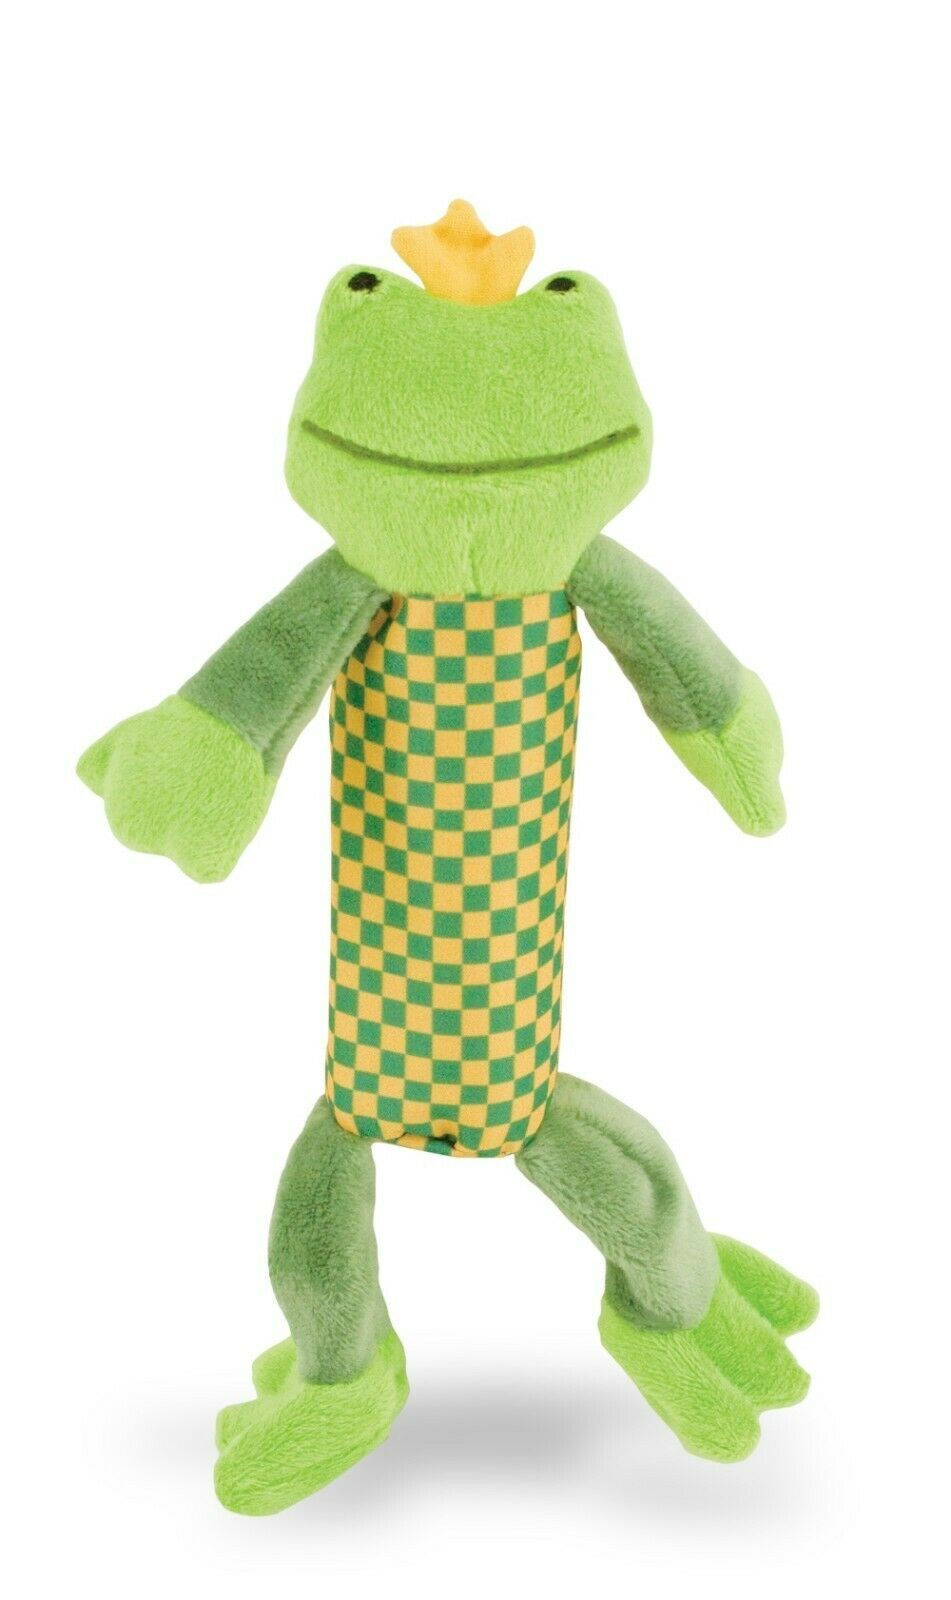 Rich Frog Squeak Easy plush green frog baby / small dog toy. New!